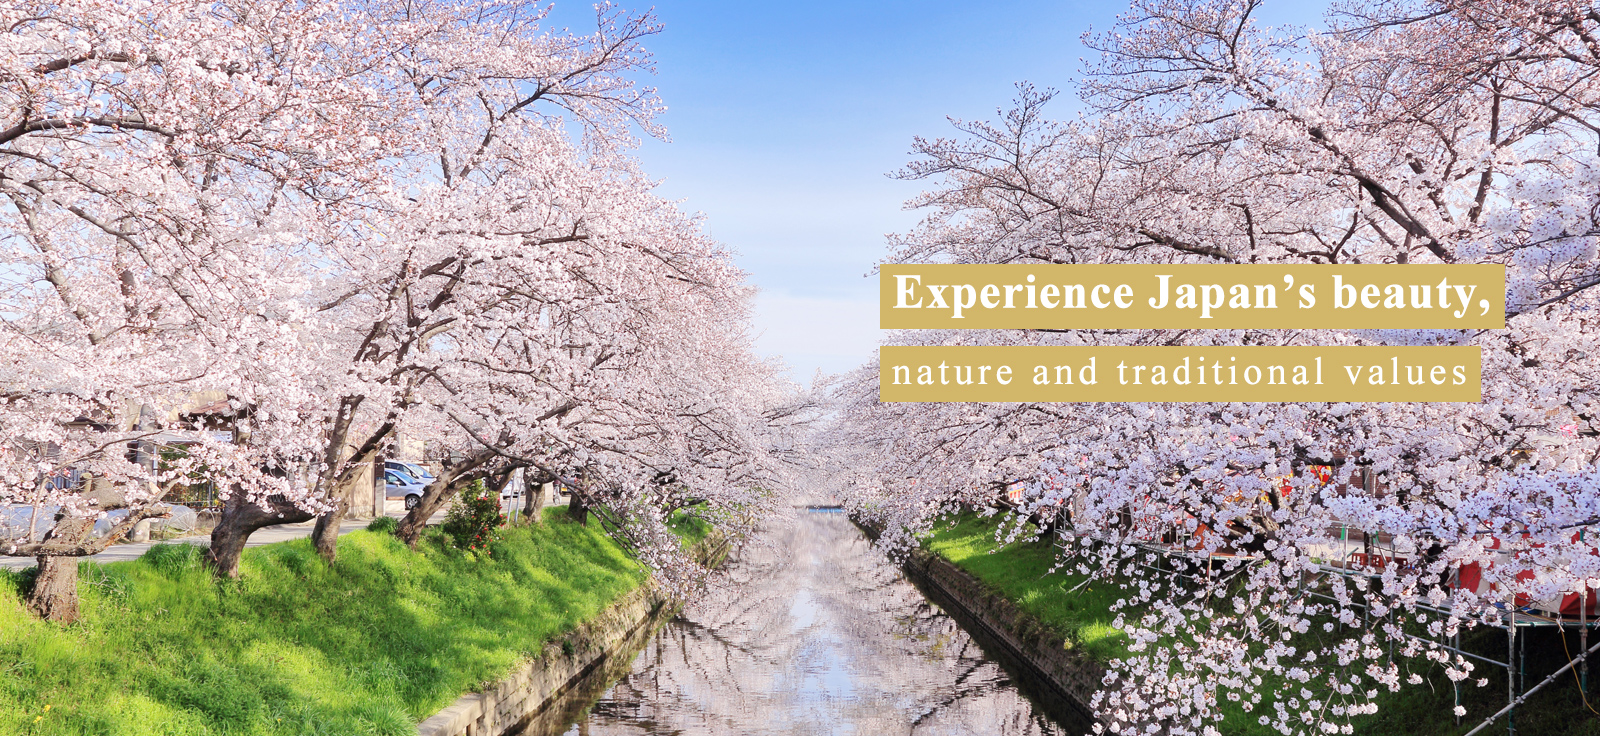 Japan is full of beautiful natural scenery and traditional culture.